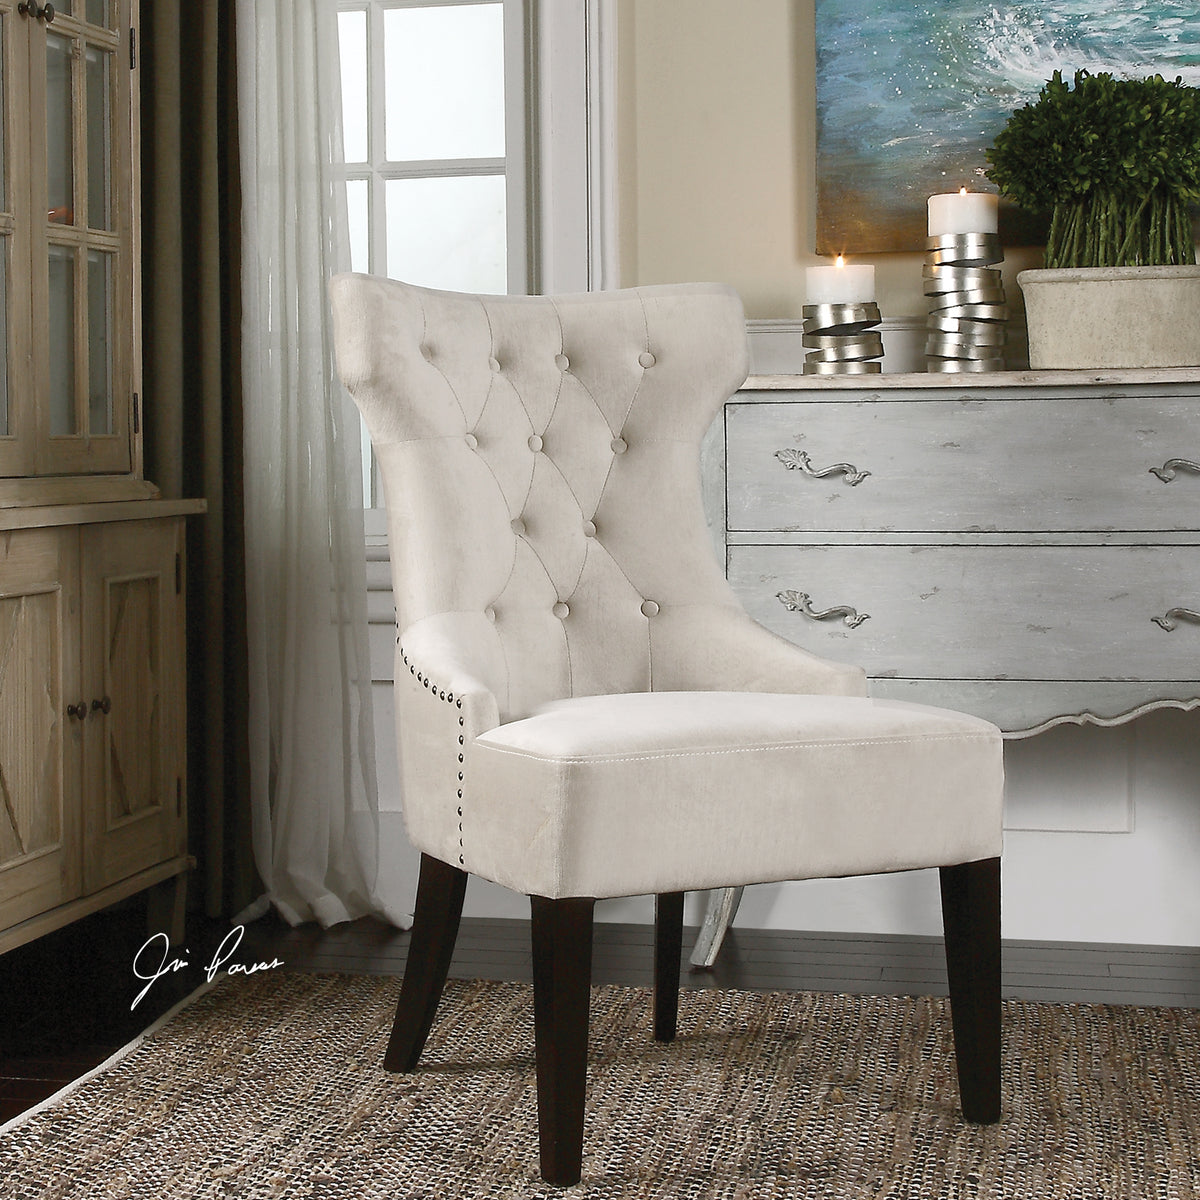 Arlette Wing Chair